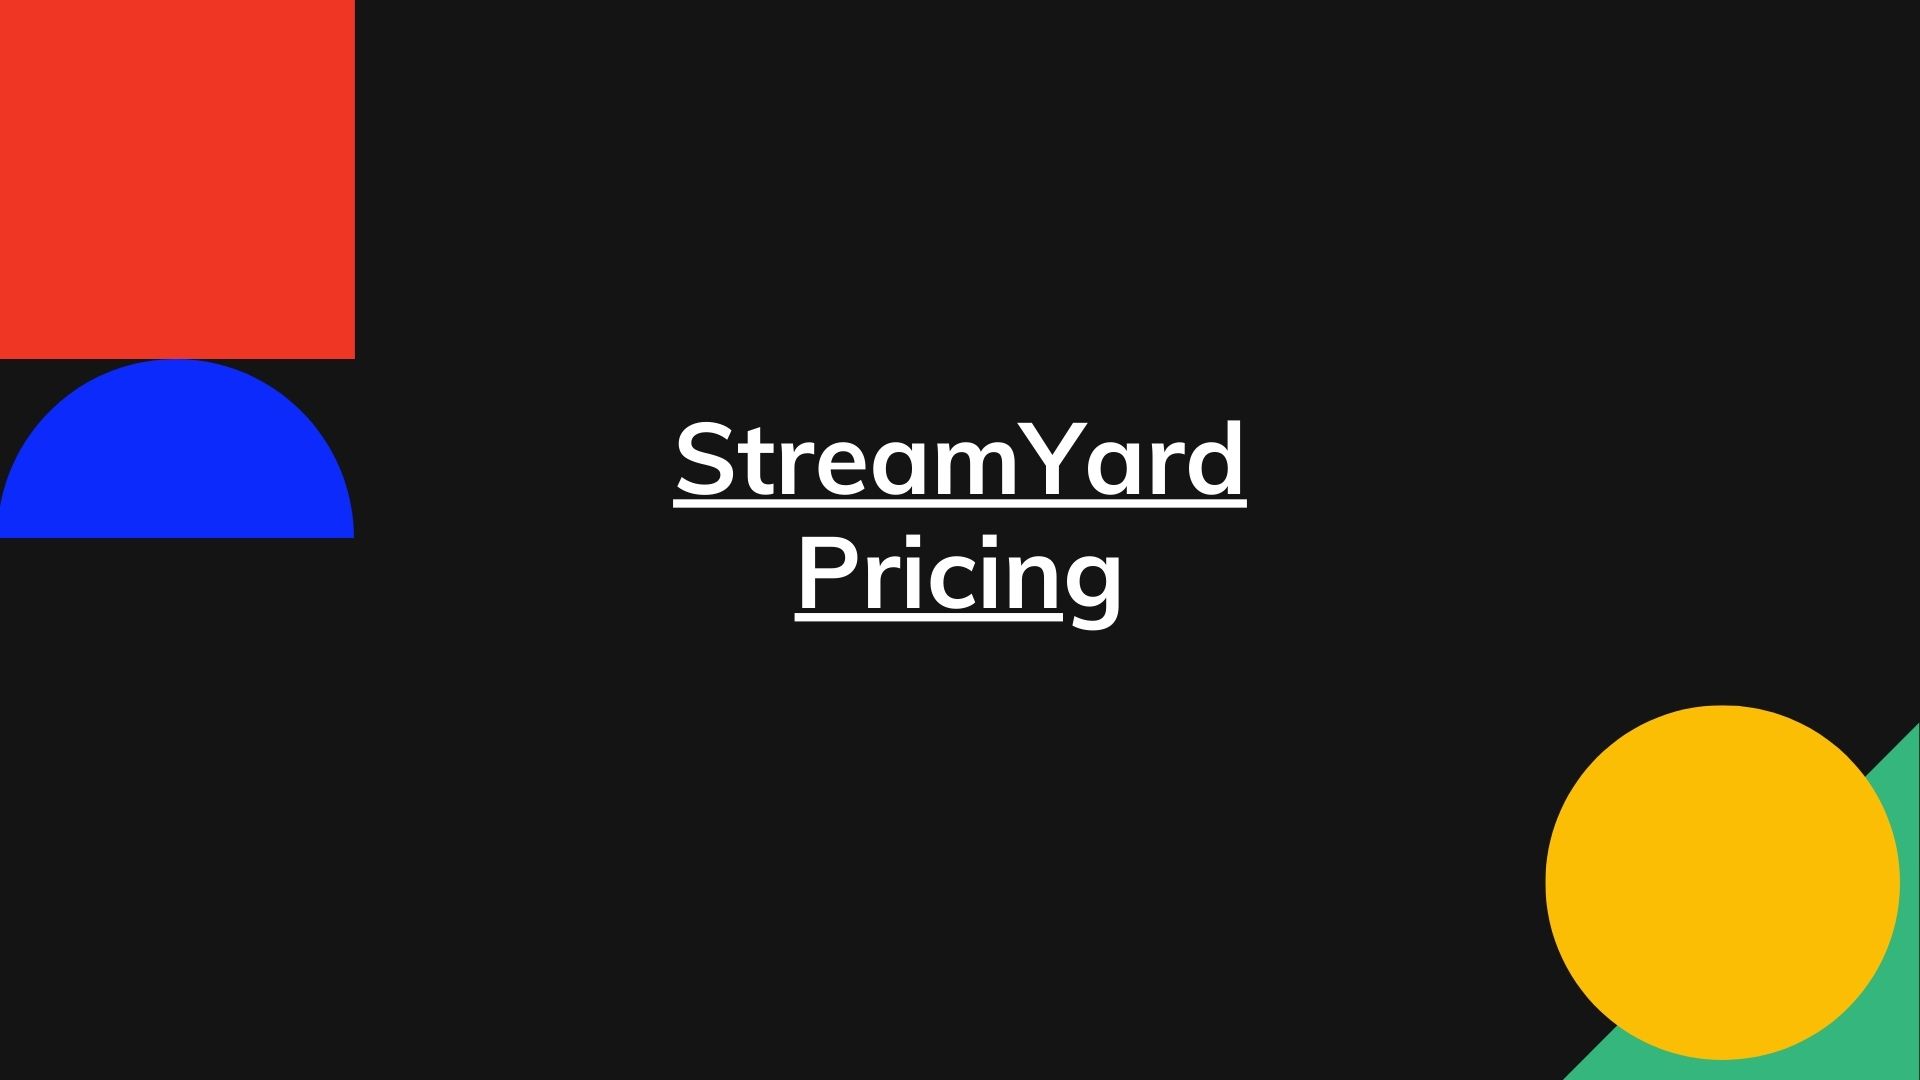 StreamYard Pricing – Actual Prices for All Plans, Enterprise Too